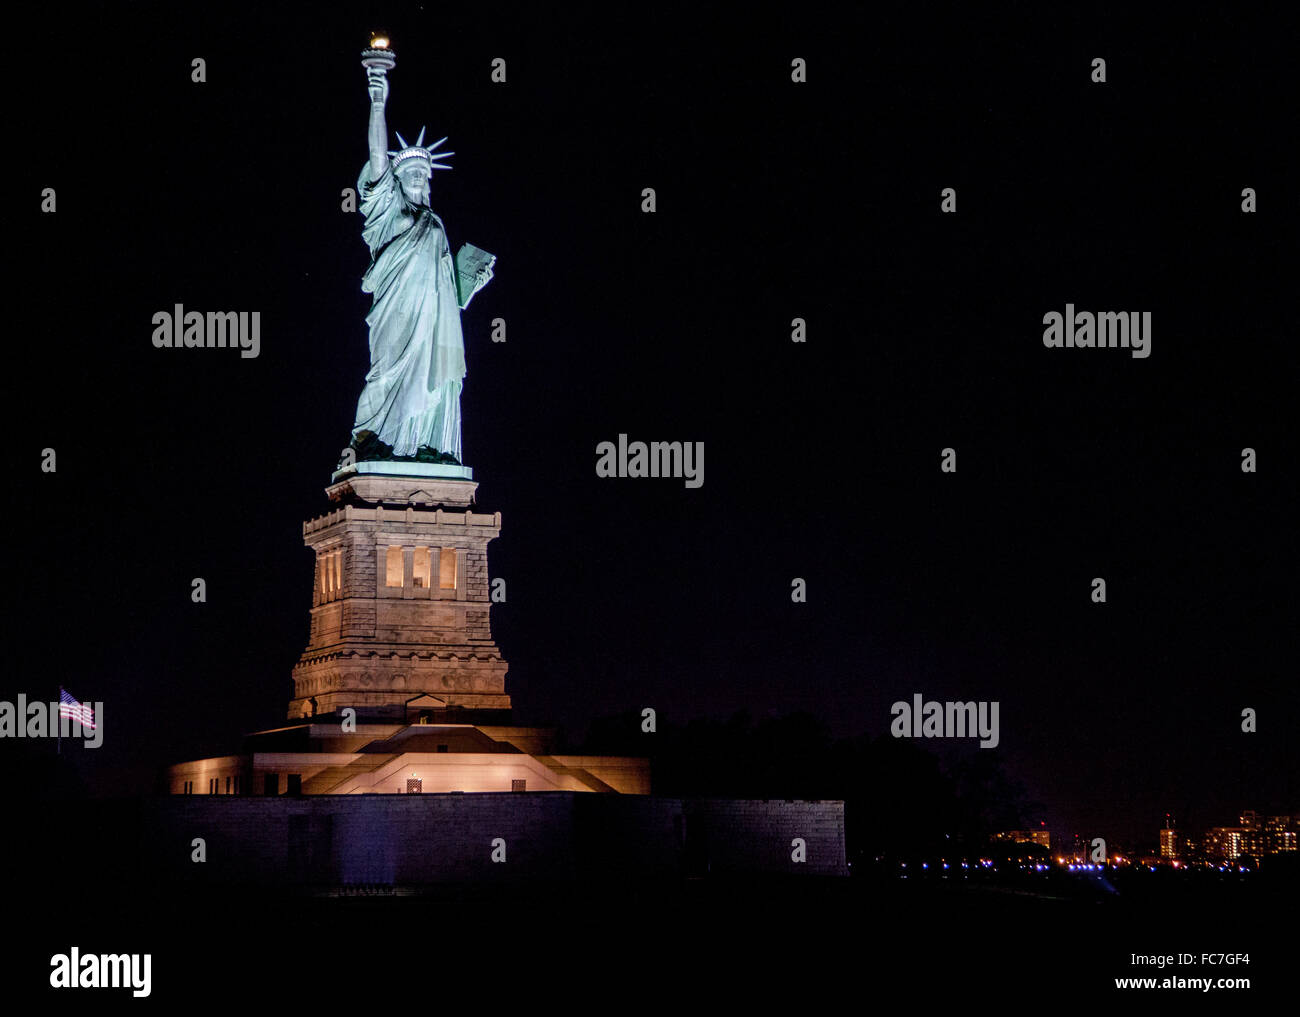 Statue of Liberty, New York USA at night seen from a boat on The Hudson River. Stock Photo